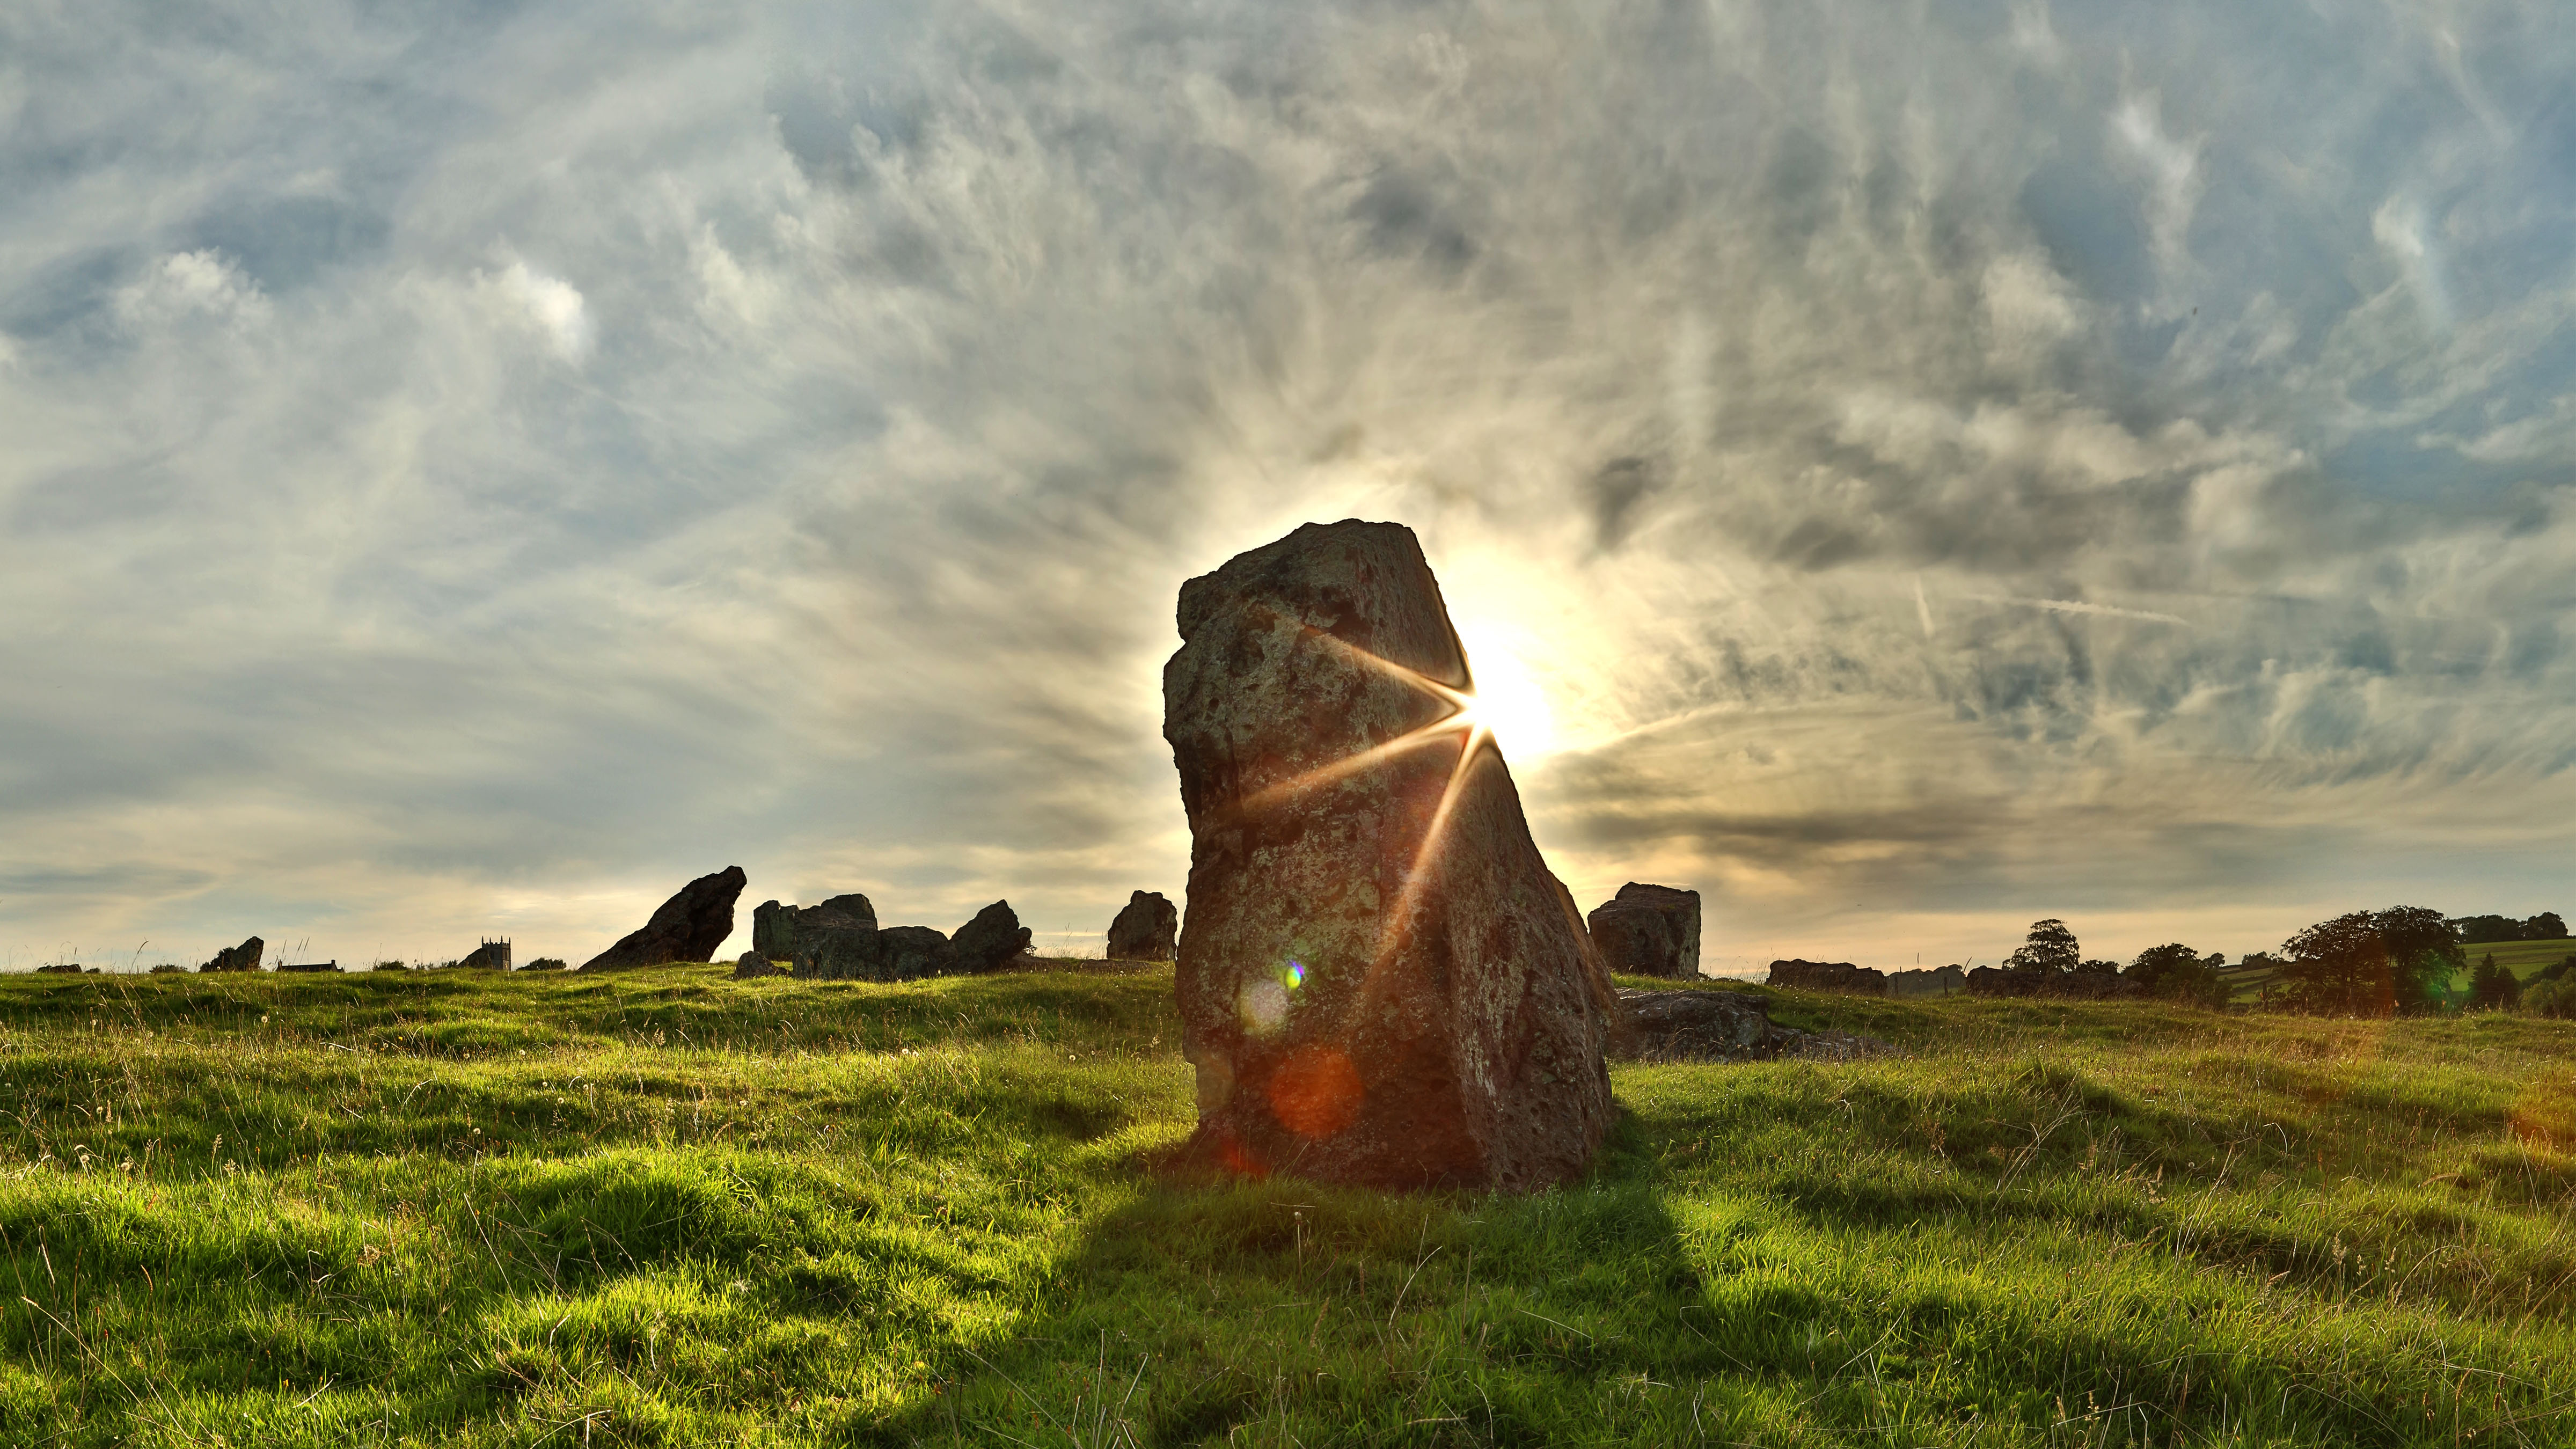 a big stone is in front of the sun's rays. the stone is on grass. Far in the back are other very large stones and trees, and a cloudy sky